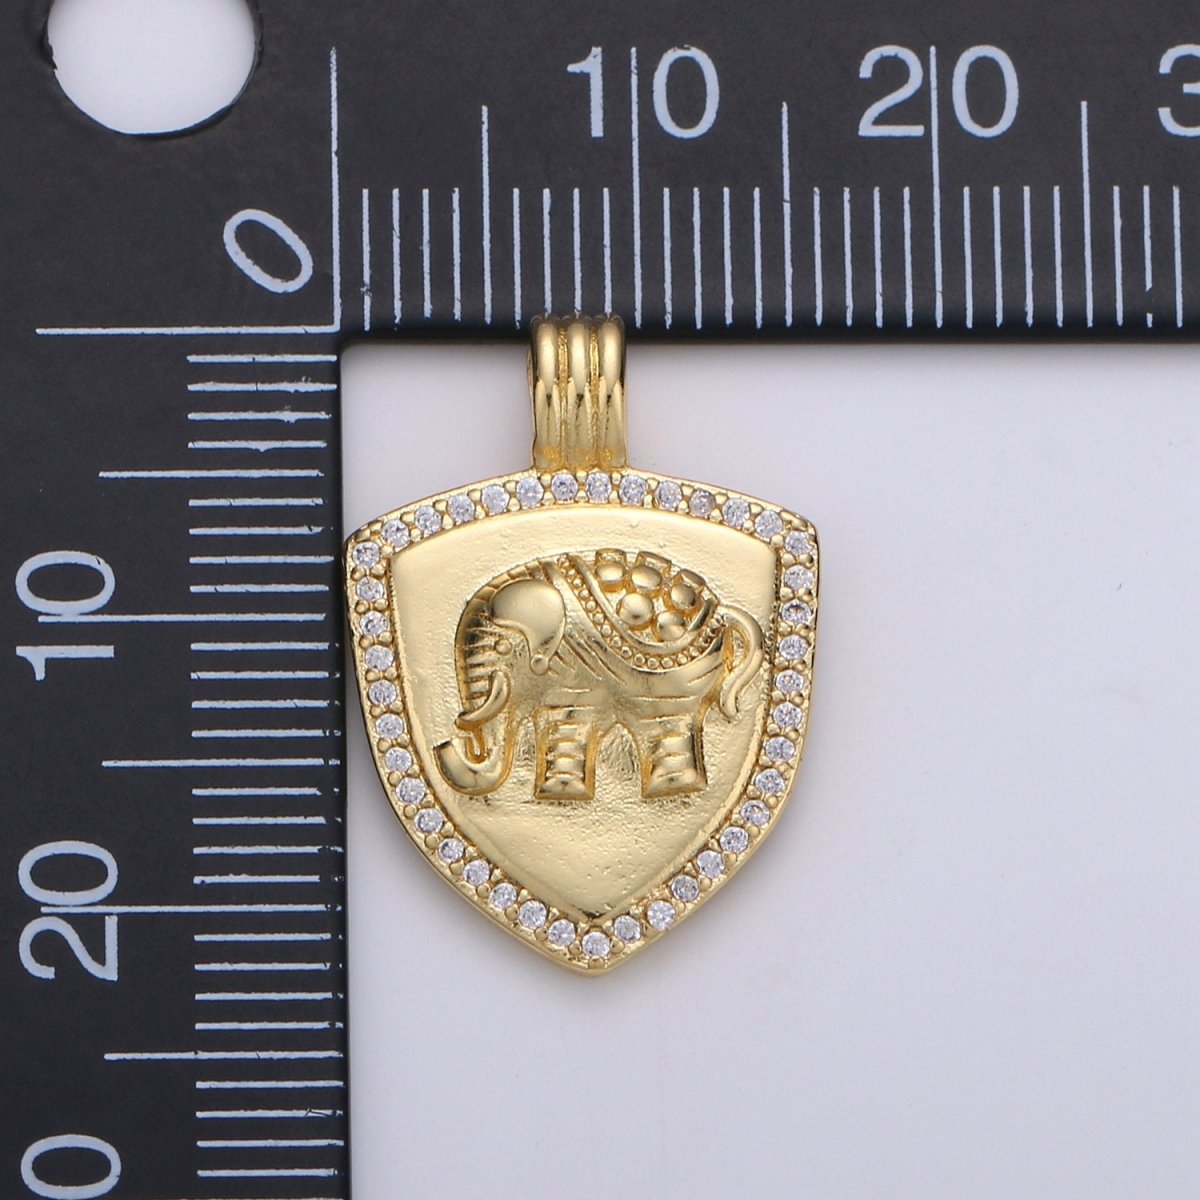 Dainty 14k Gold Filled Shield Charm, Cz Shield pendant, Micro Pave Elephant Pendant Protection Jewelry Supply I-929 - DLUXCA